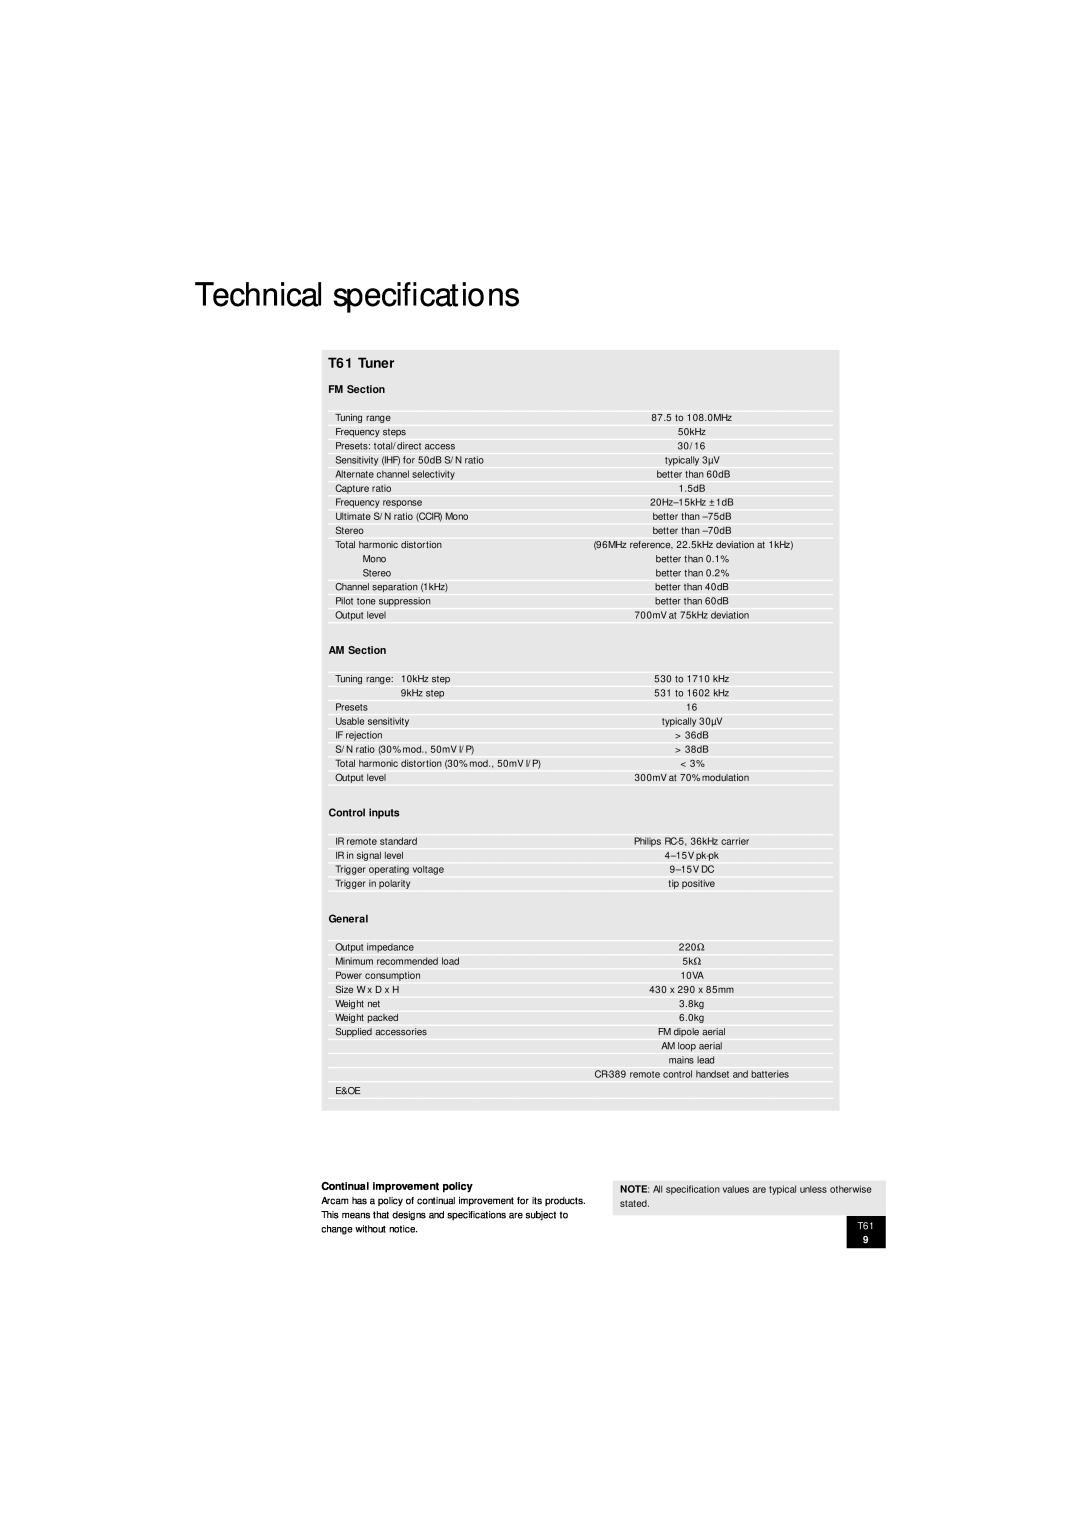 Arcam manual Technical speciﬁcations, T61 Tuner 